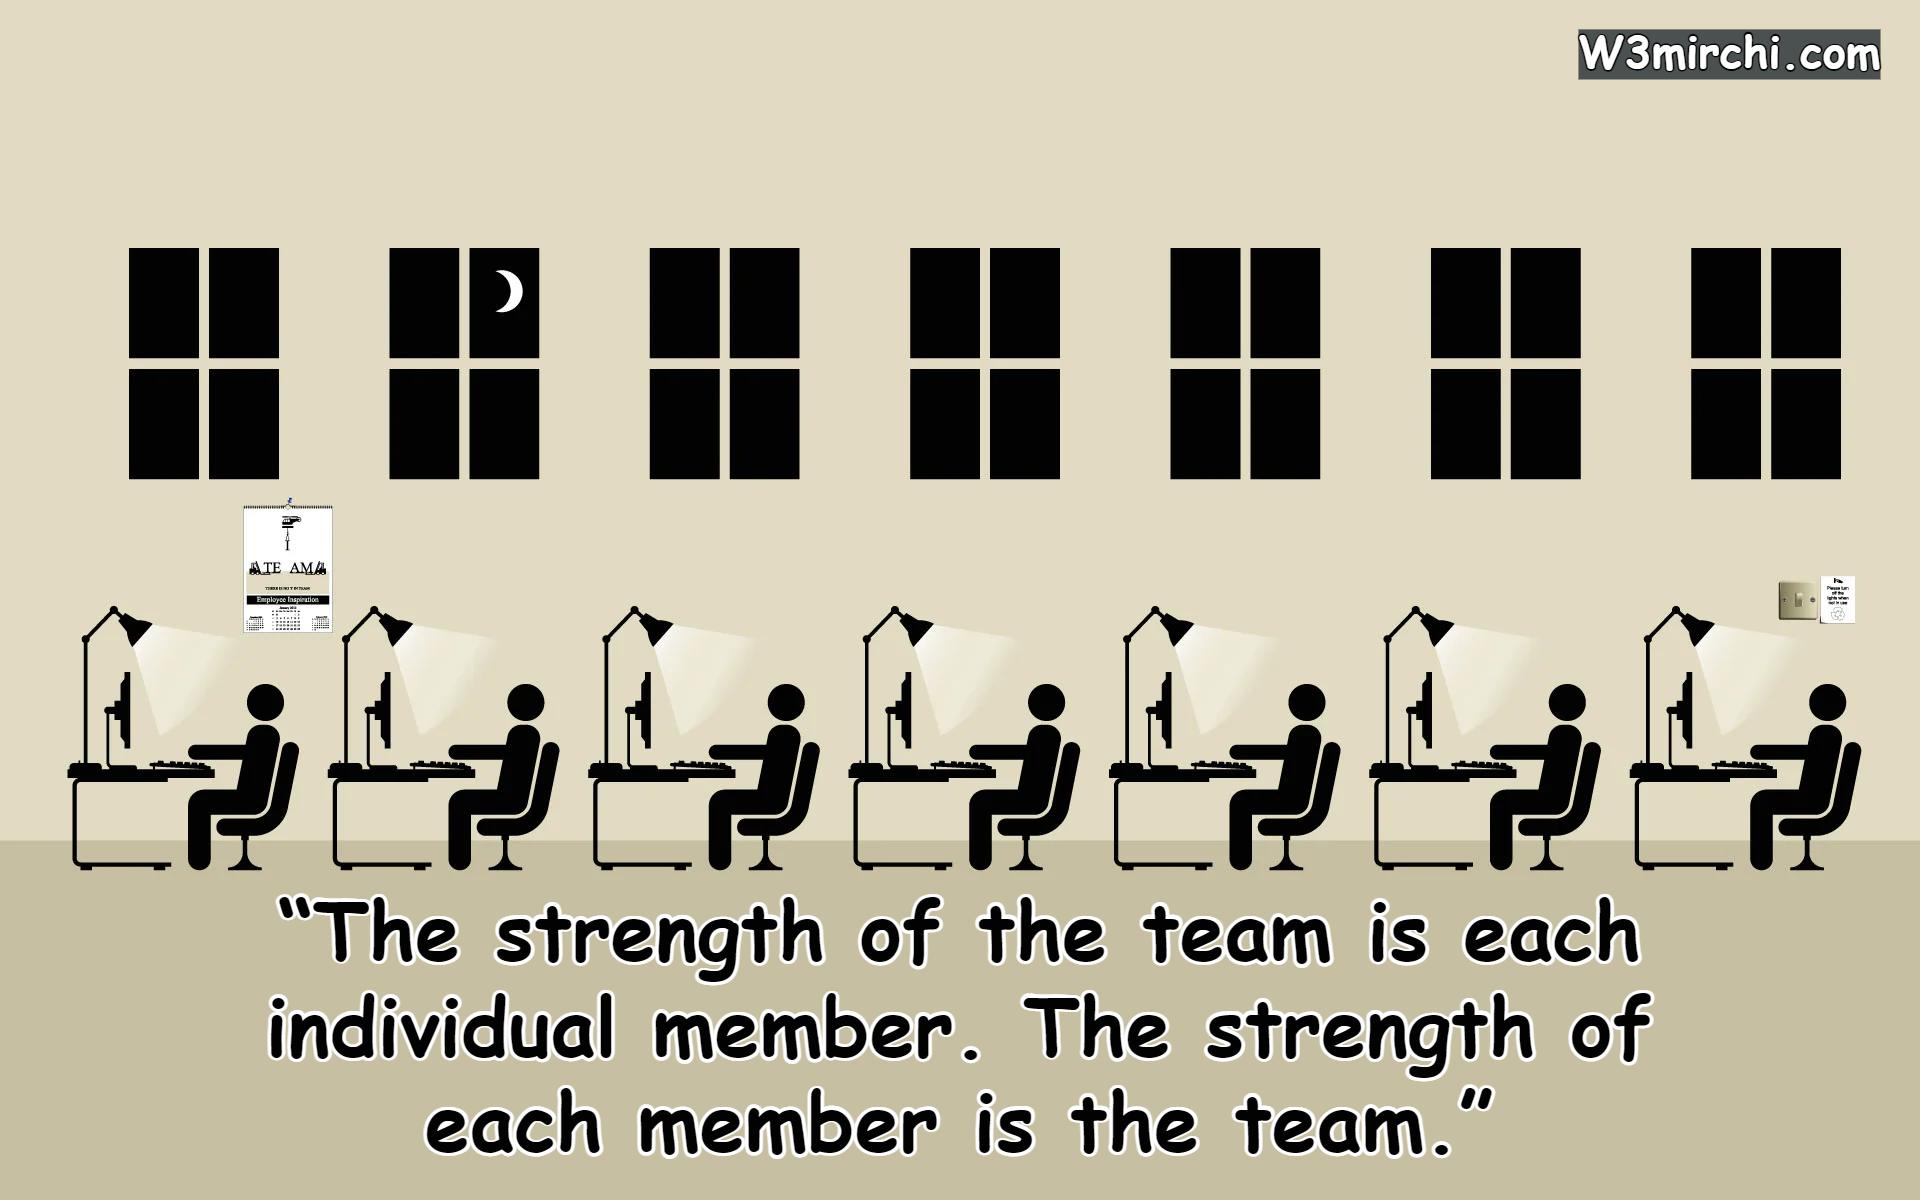 “The strength of the team is each individual member.